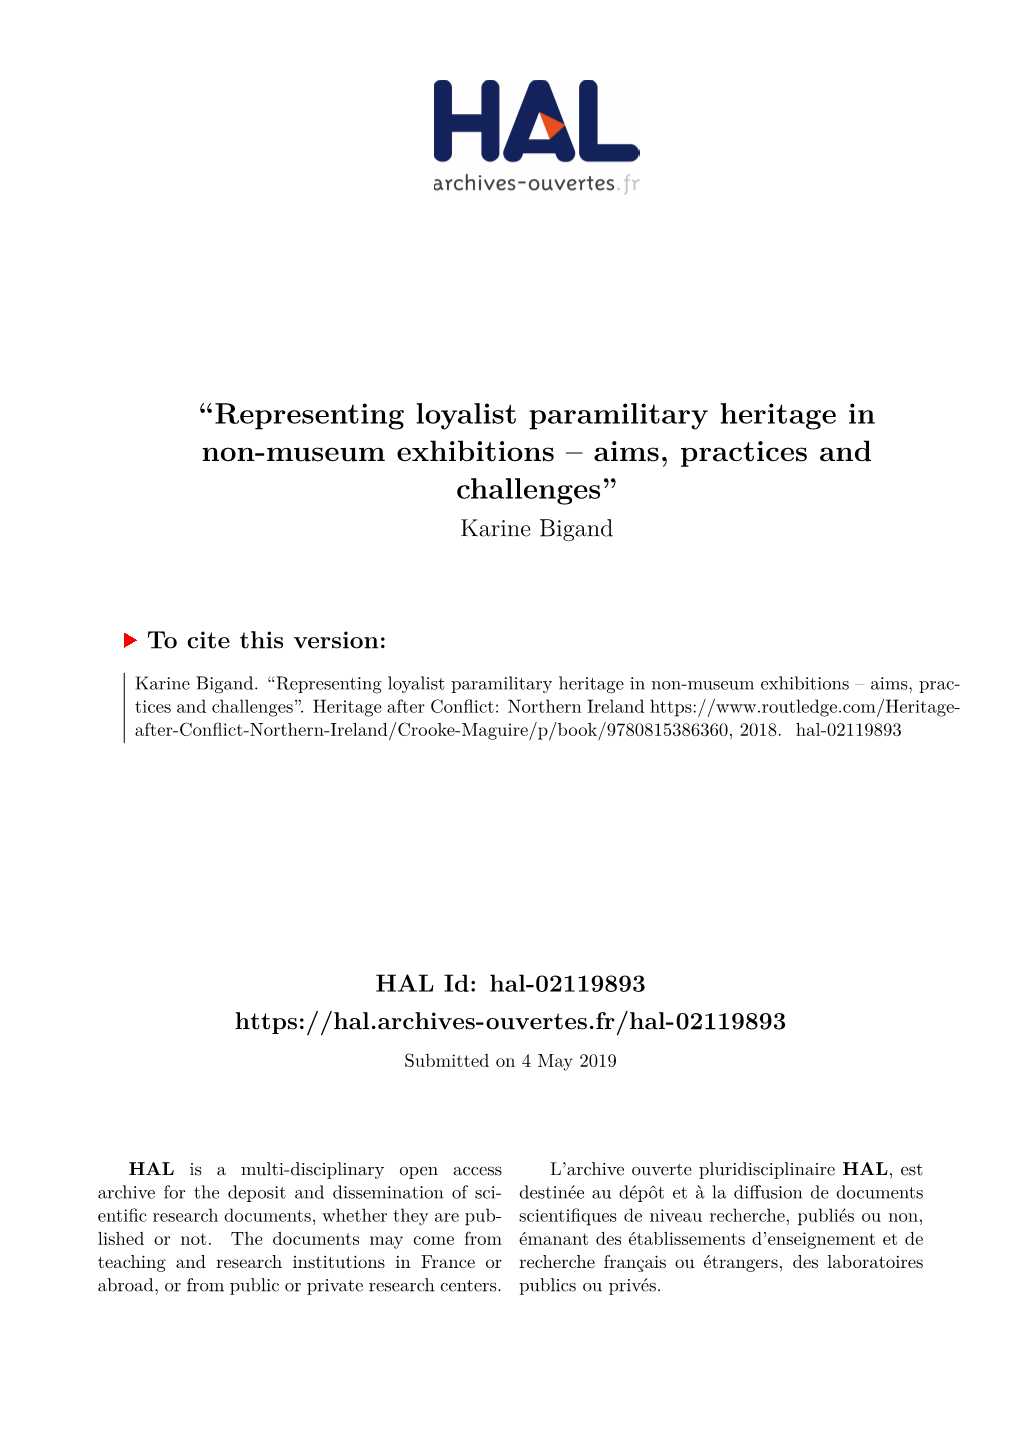 Representing Loyalist Paramilitary Heritage in Non-Museum Exhibitions – Aims, Practices and Challenges” Karine Bigand